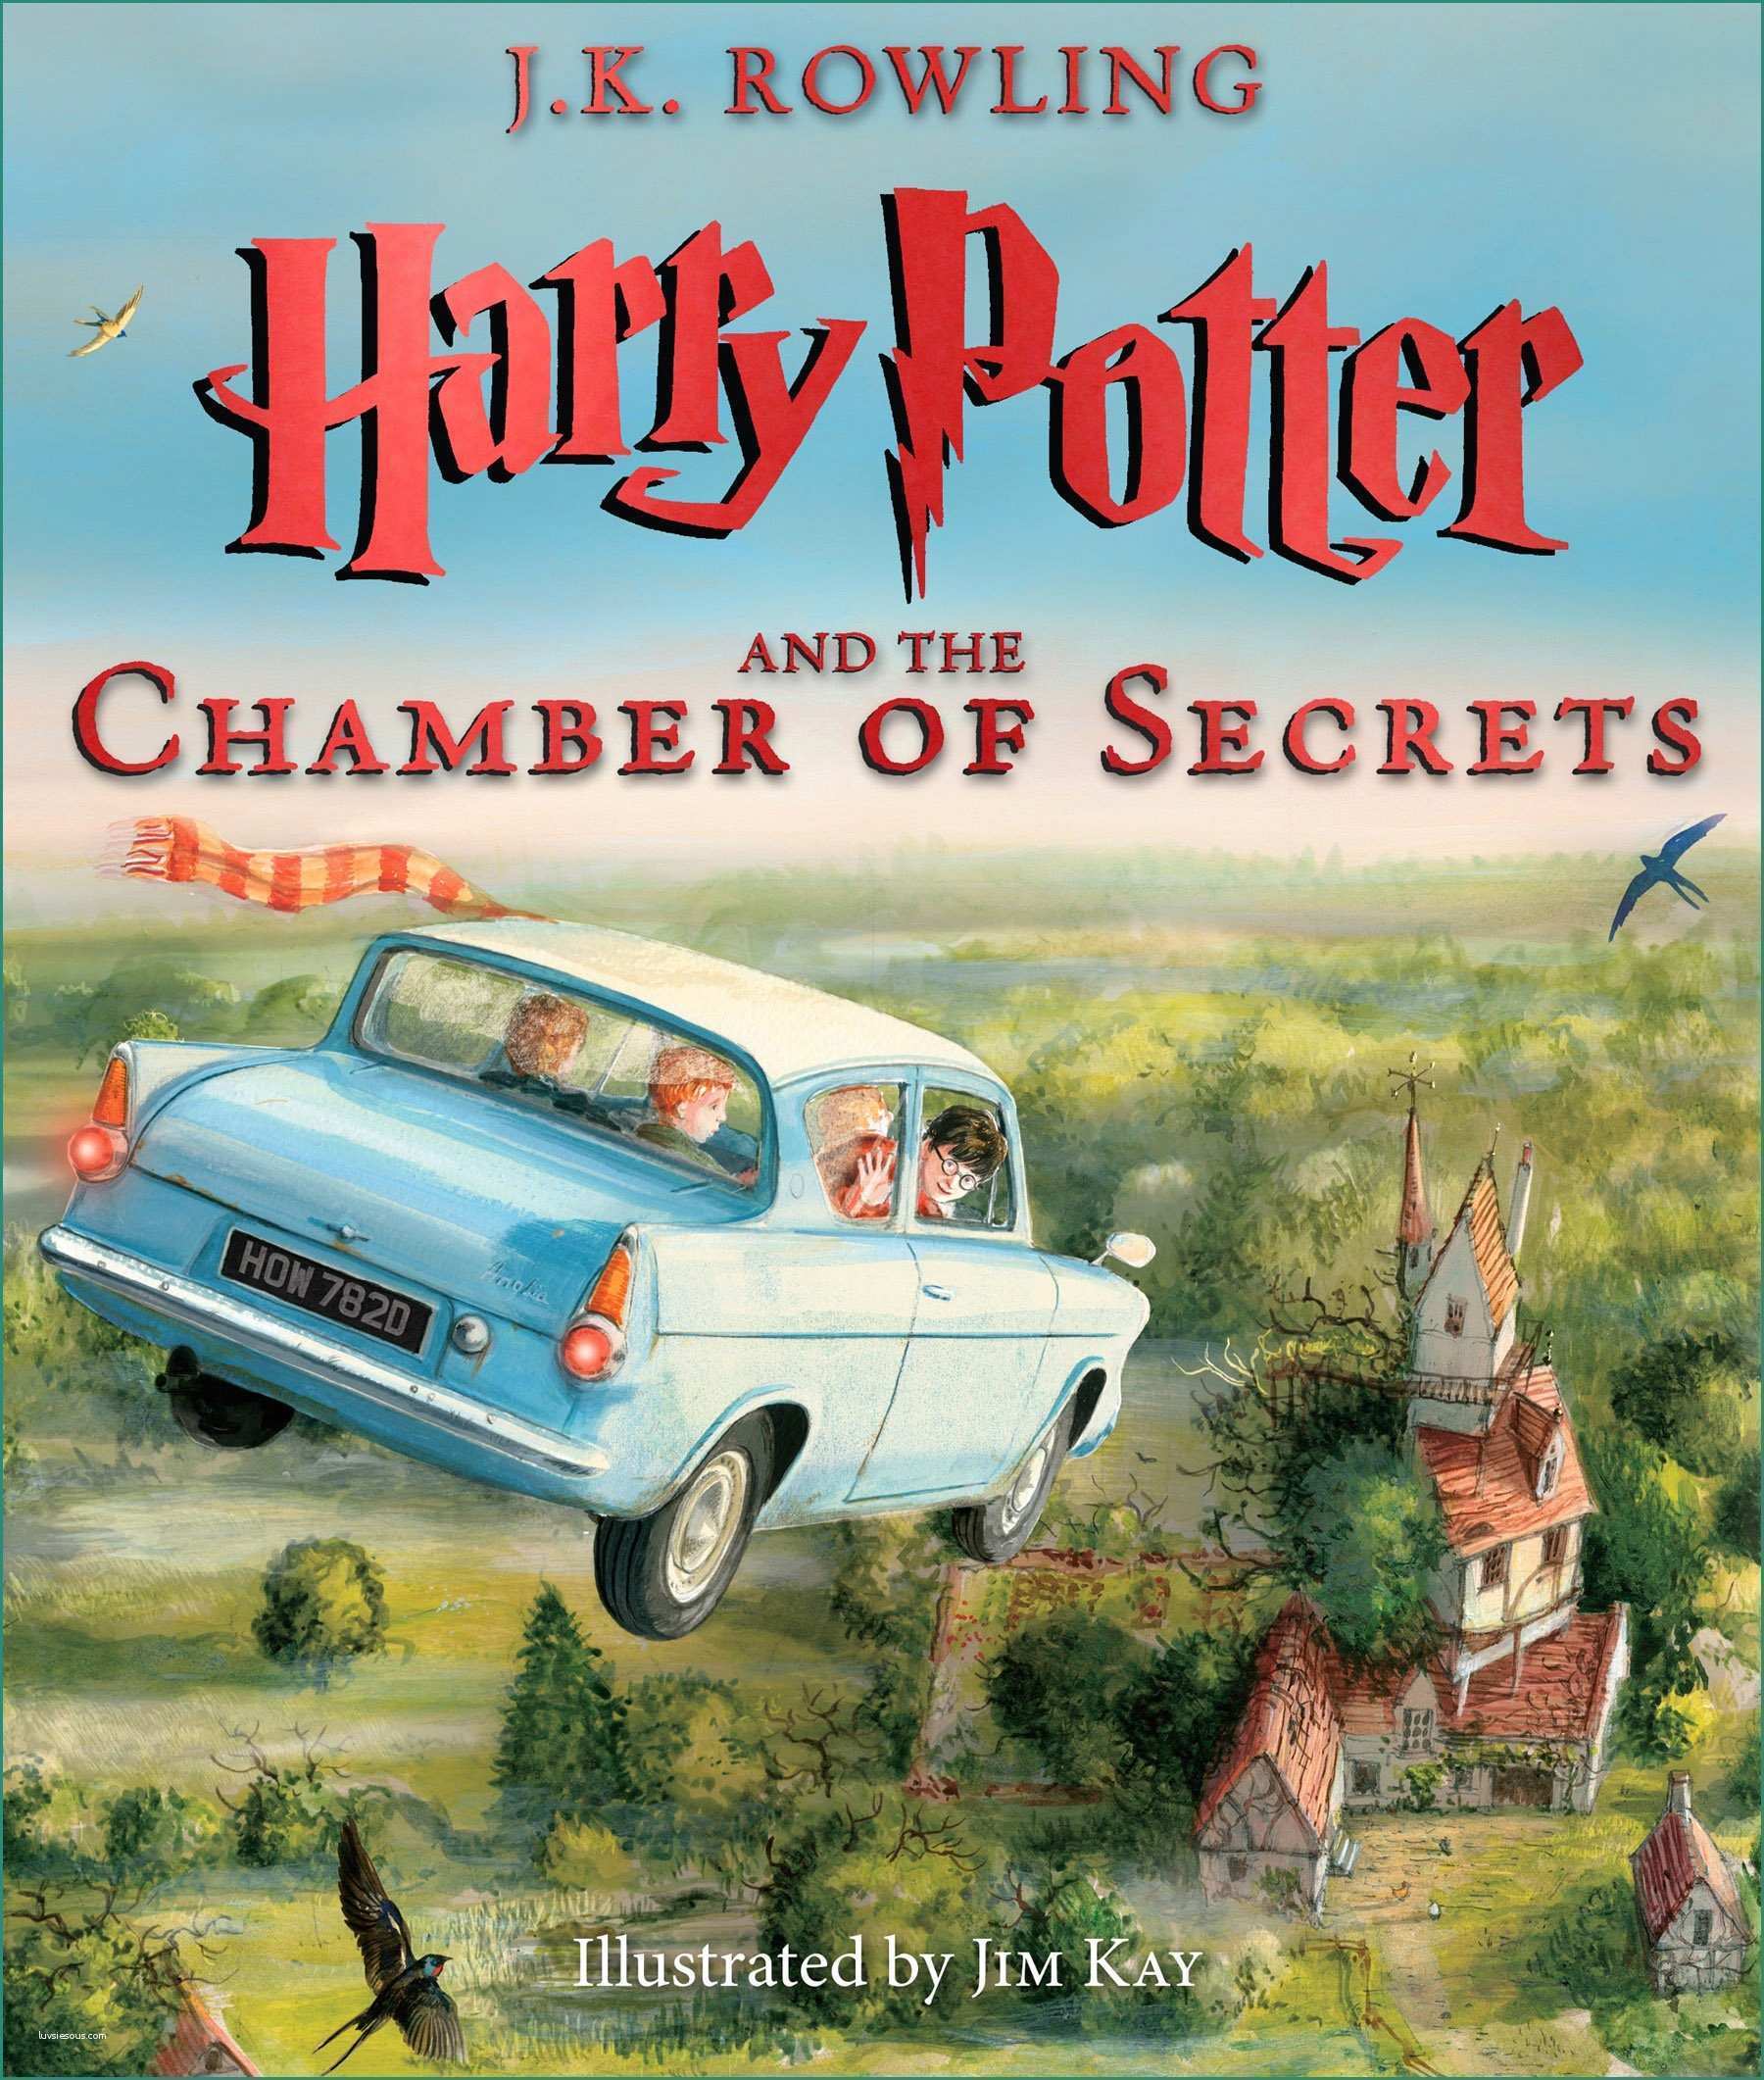 Car Wrapping Verona E Harry Potter and the Chamber Of Secrets J K Rowling Grocrastinate